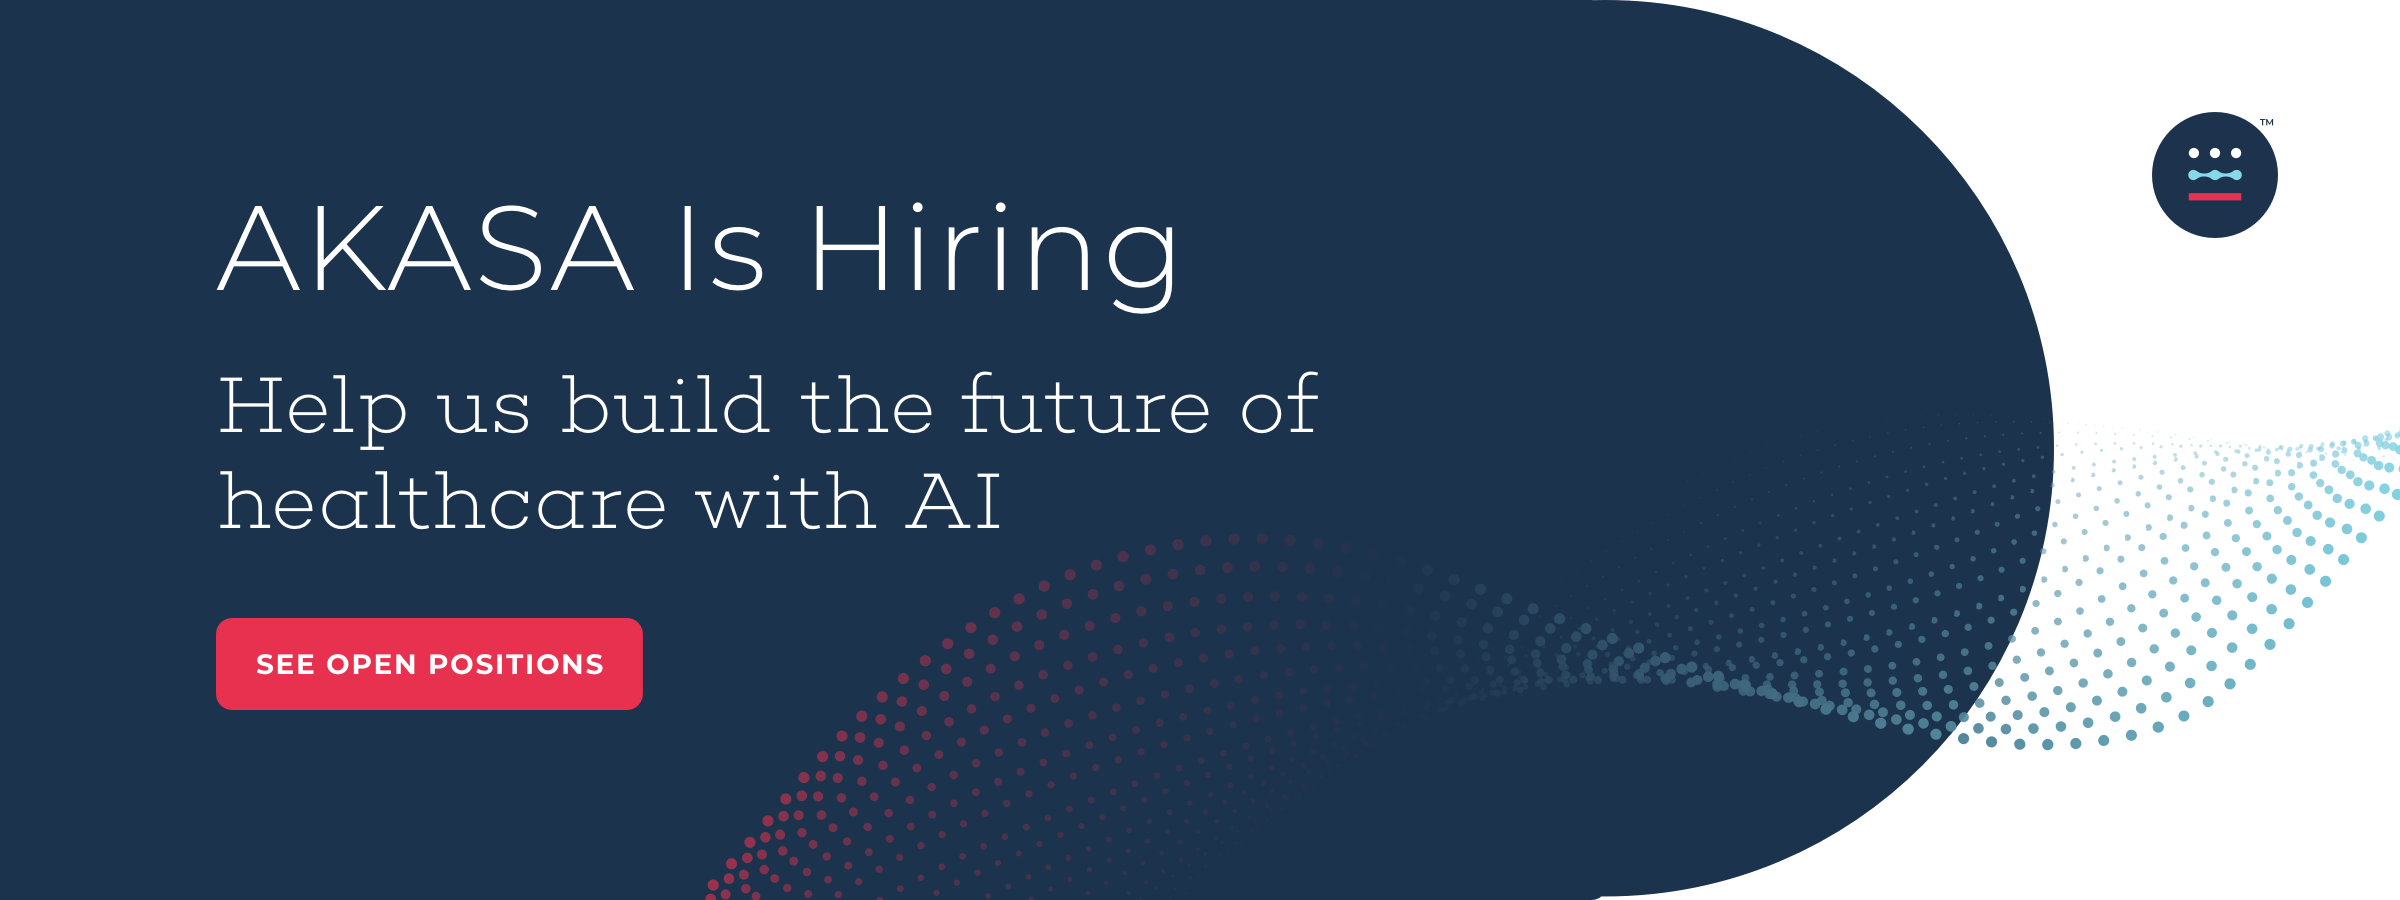 AKASA is hiring: help us build the future of healthcare with AI. See open positions.